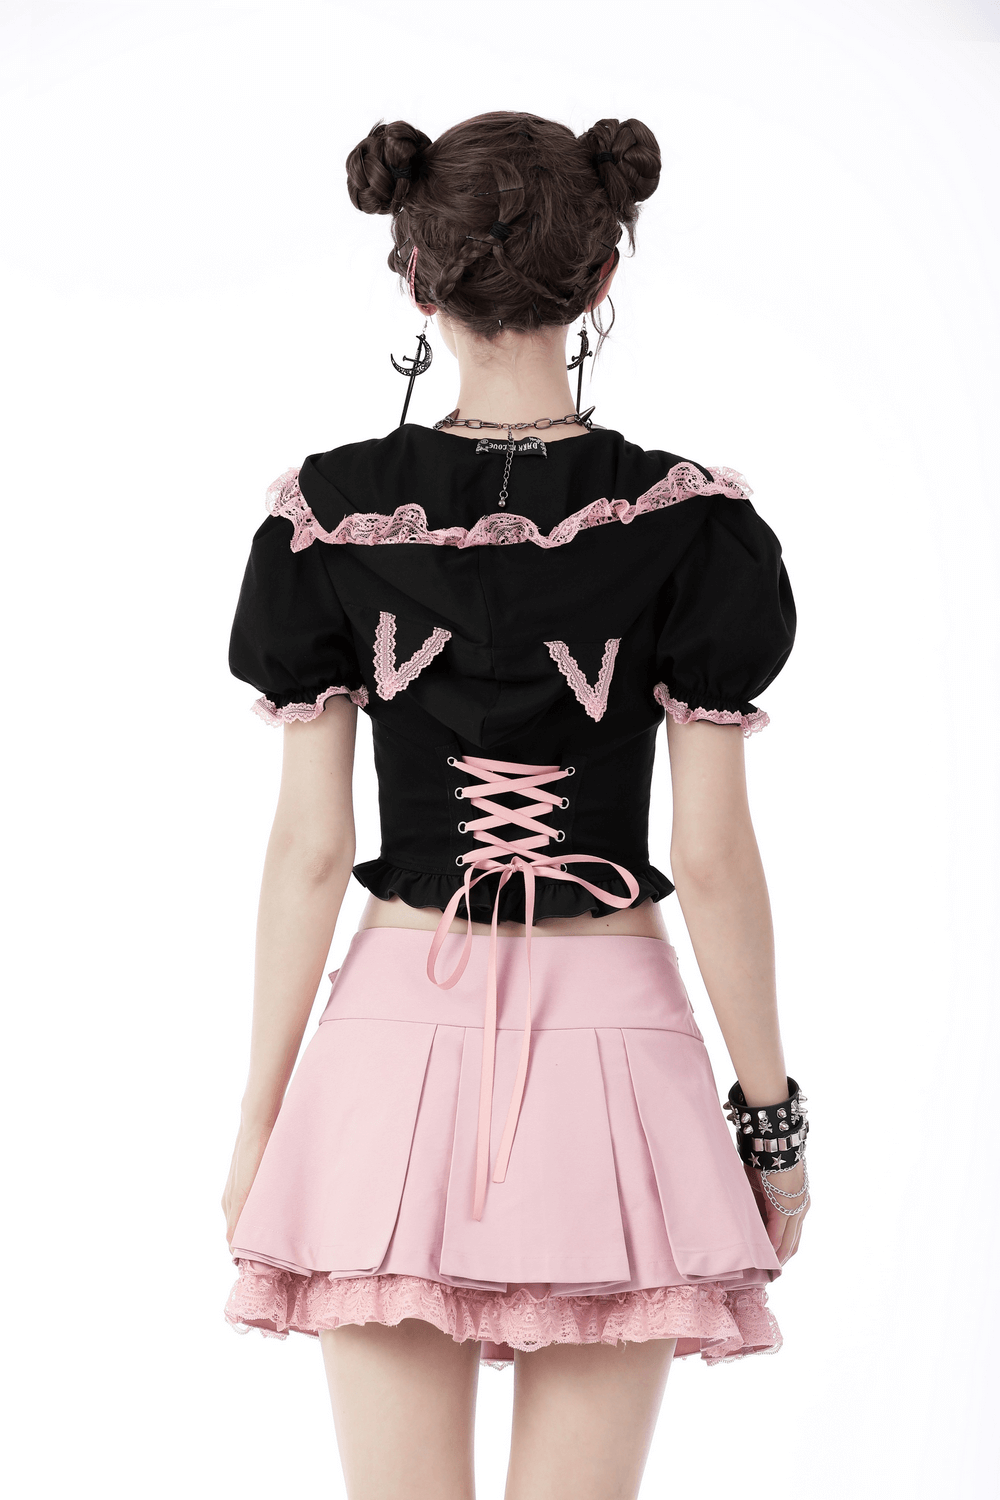 Black Cat Ear Crop Top with Hood And Pink Lace Collar